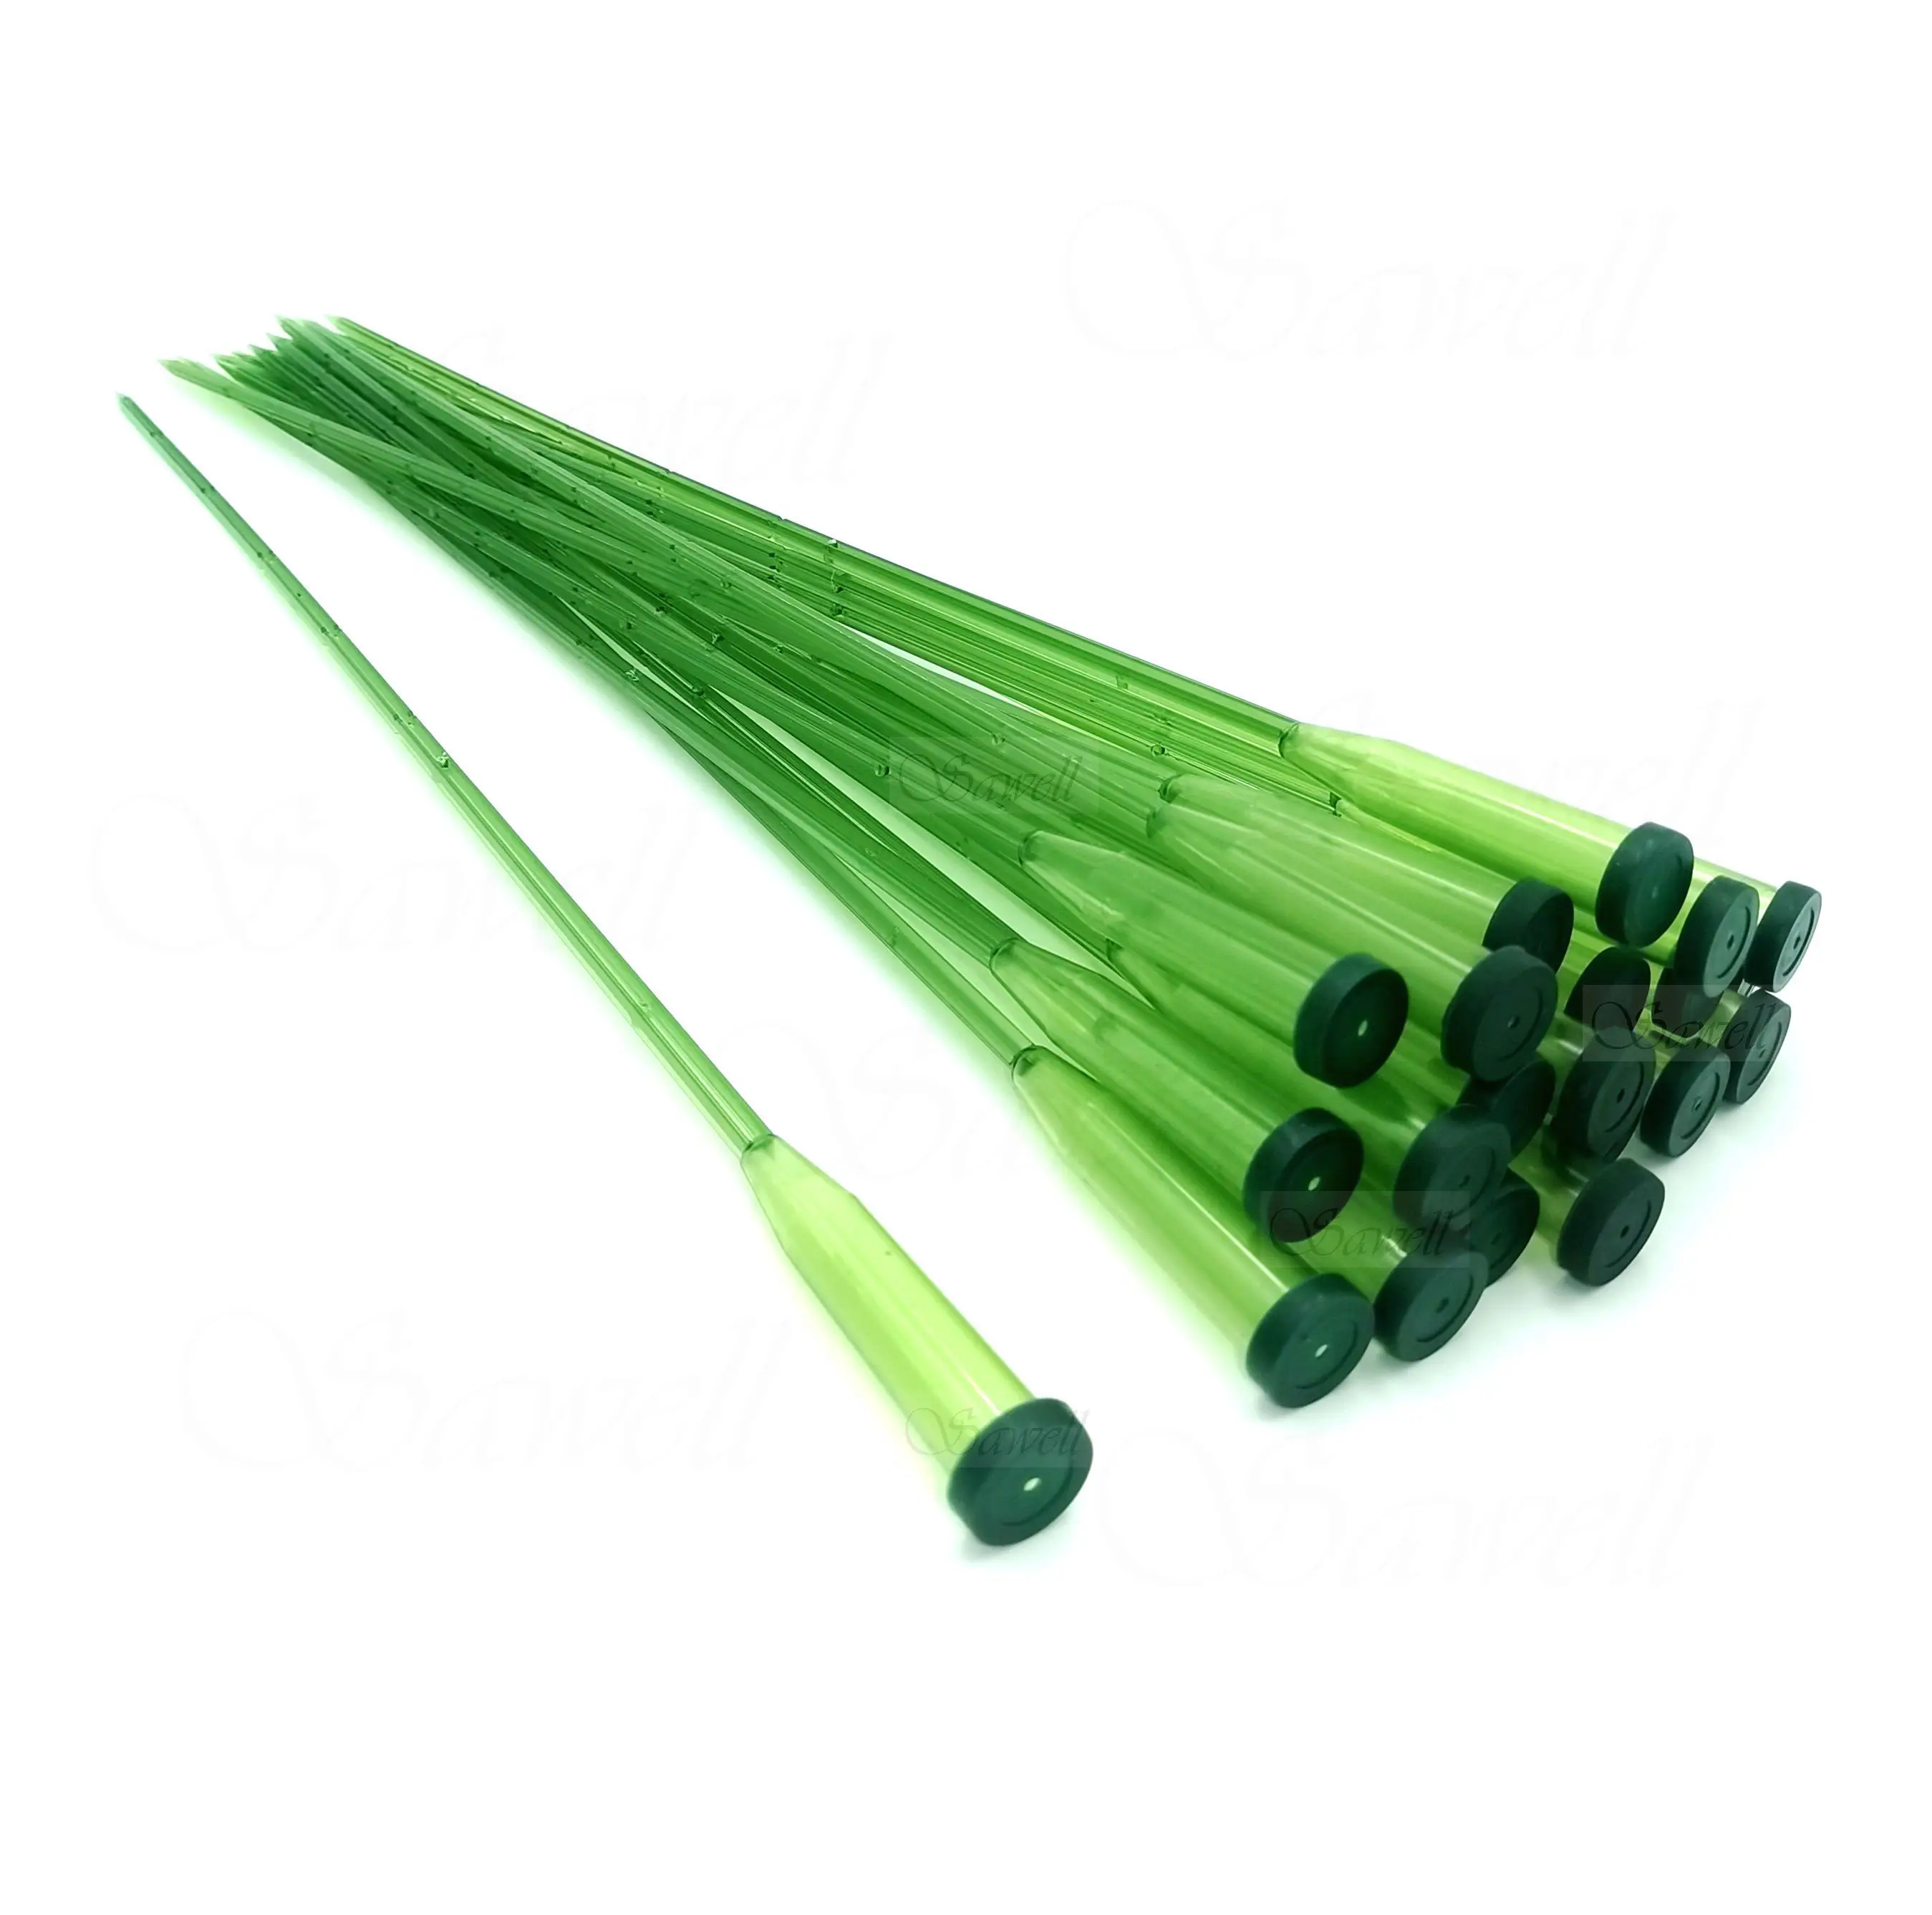 1.5 /2.8 in Length PH PandaHall 120pcs 2 Sizes Floral Water Tubes Flower Picks Floral Tubes Vials with Caps for Milkweed Stem Cuttings Flower Arrangements 